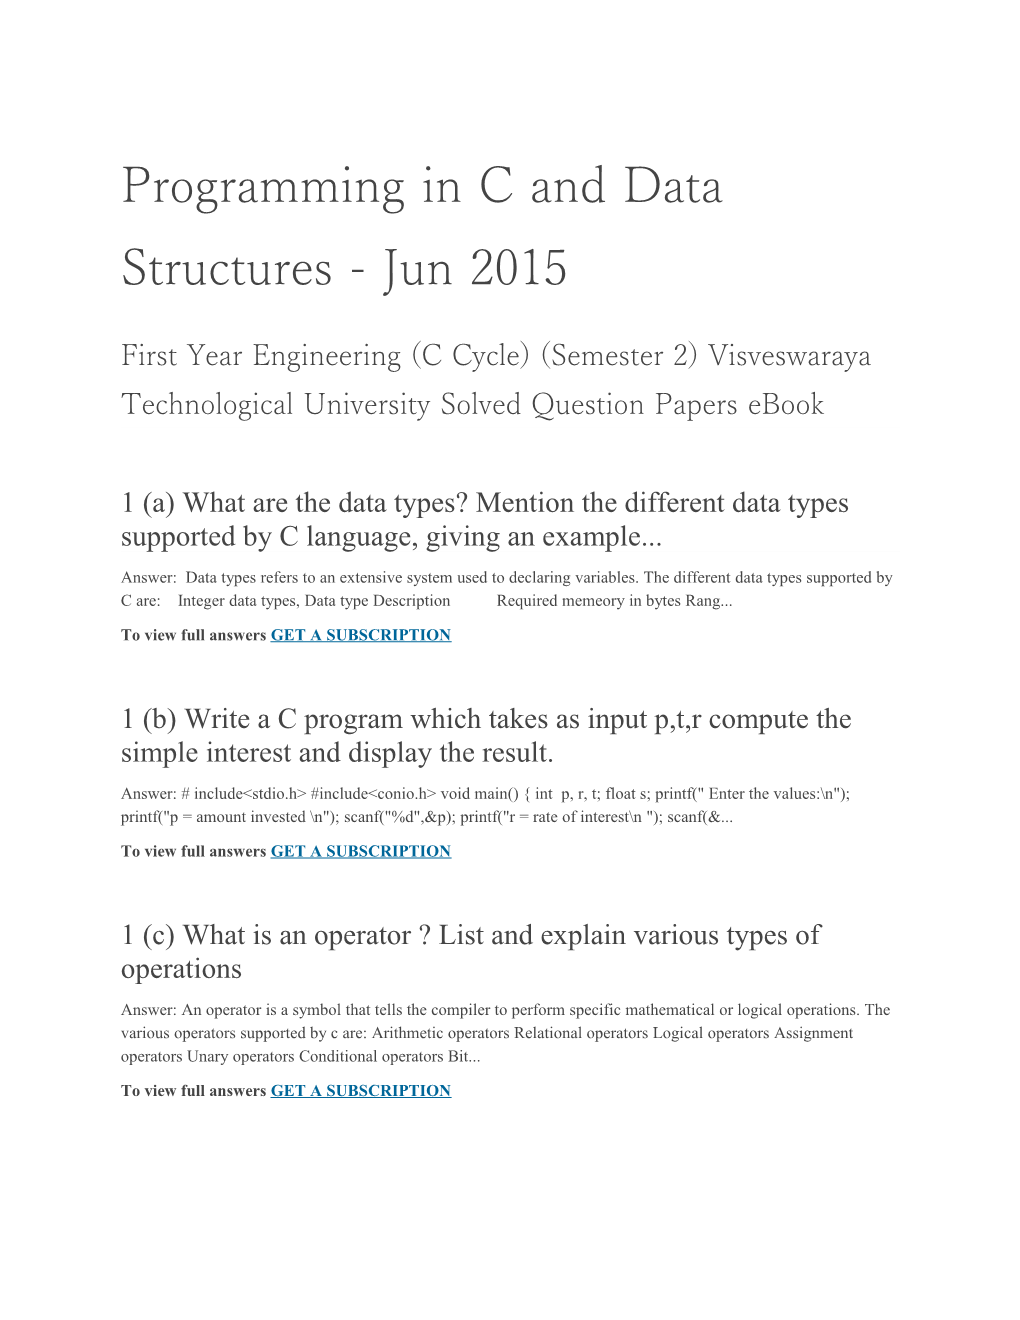 Programming in C and Data Structures - Jun 2015